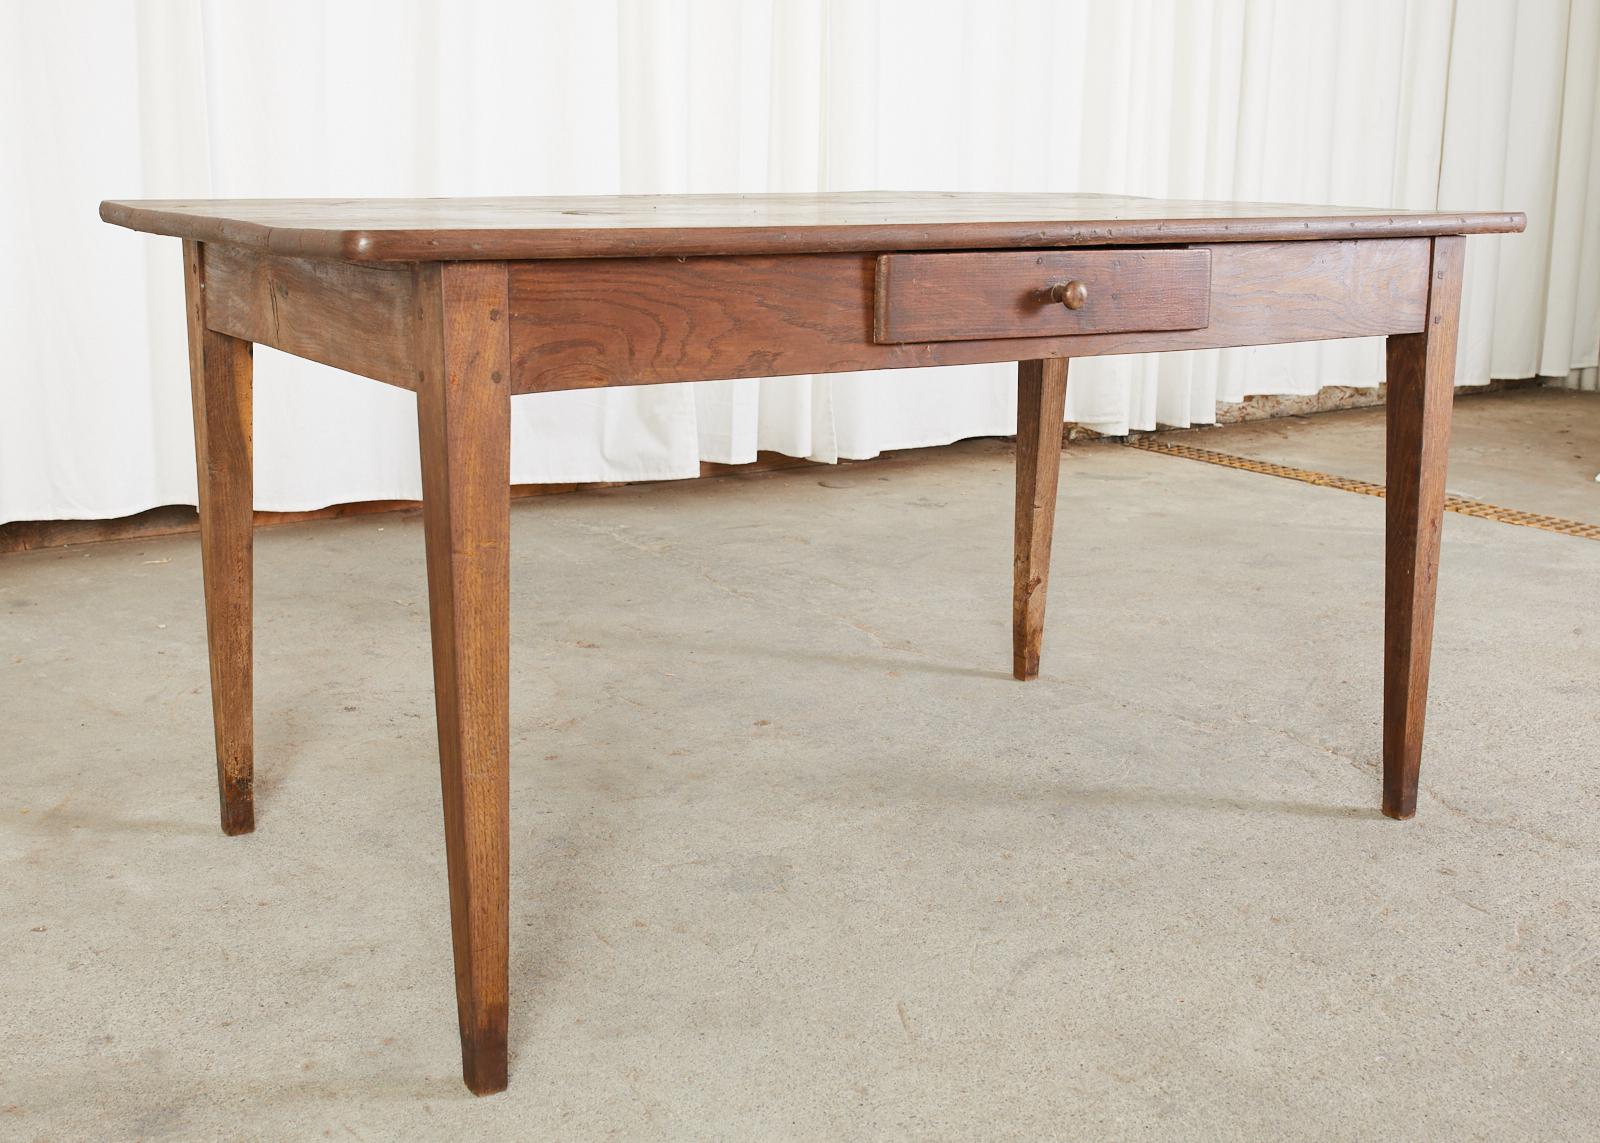 20th Century Country French Painted Pine Farmhouse Dining Table